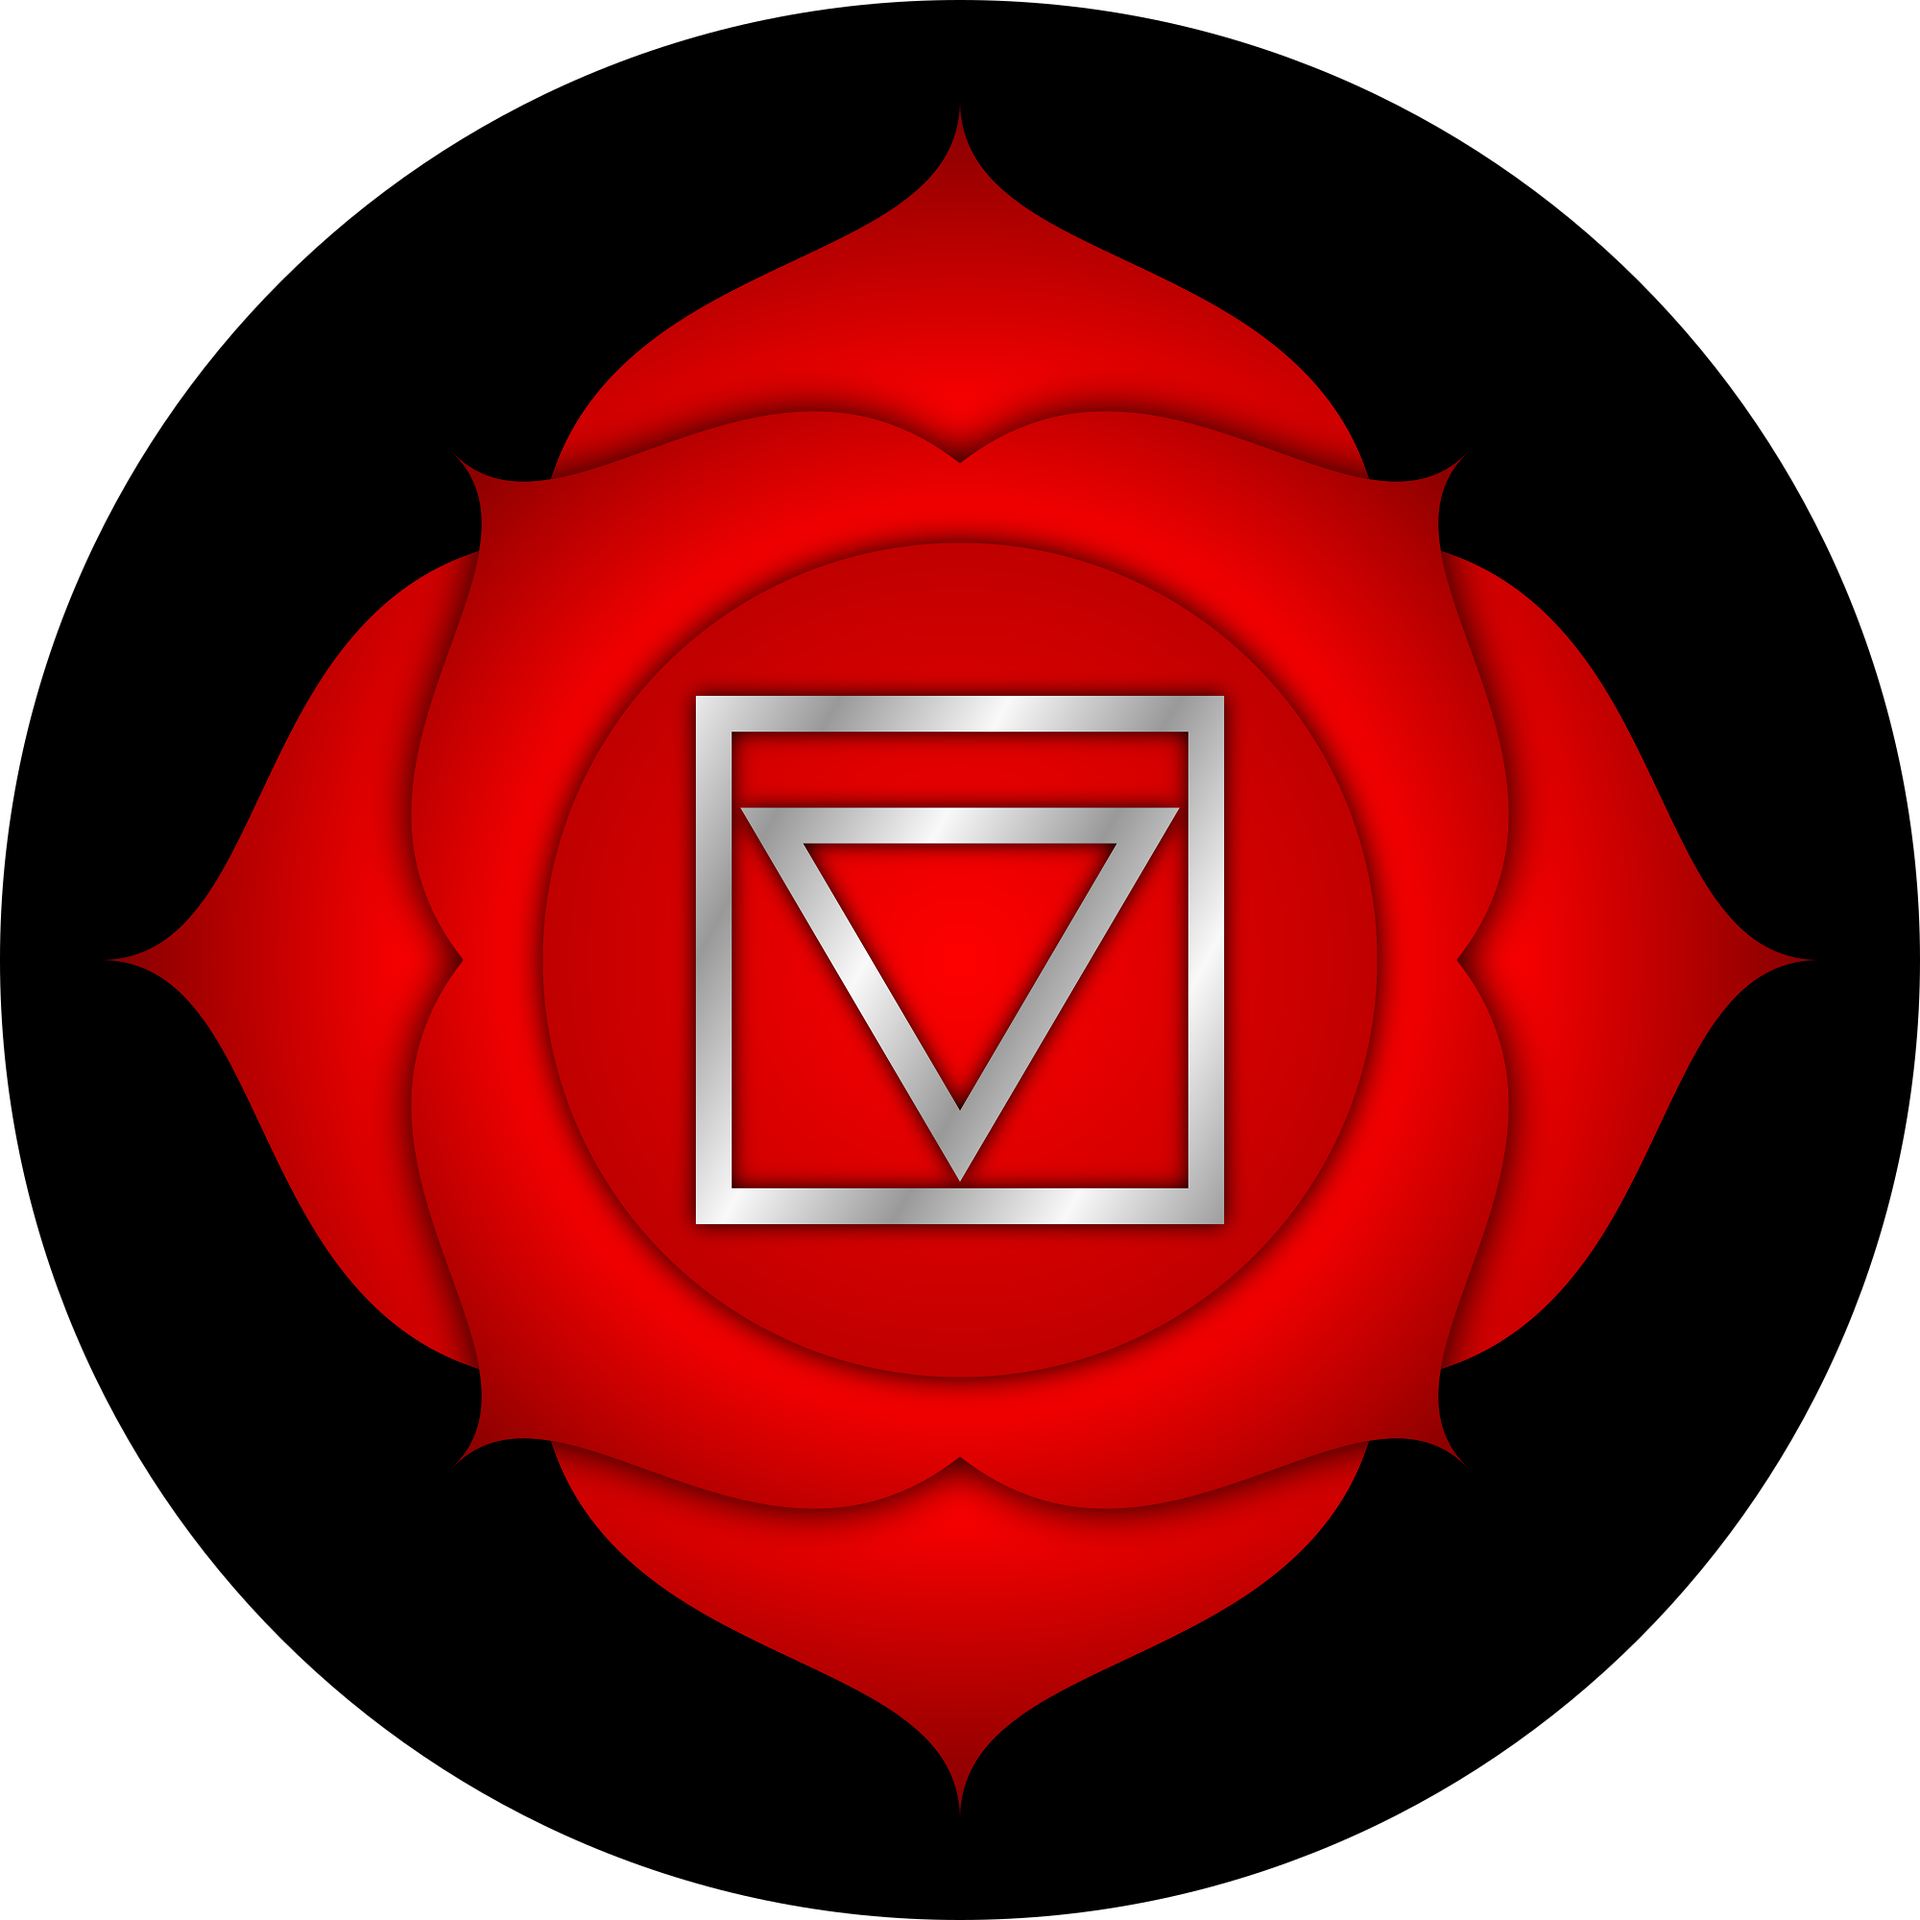 Bright illustration of the symbol for the 1st chakra.